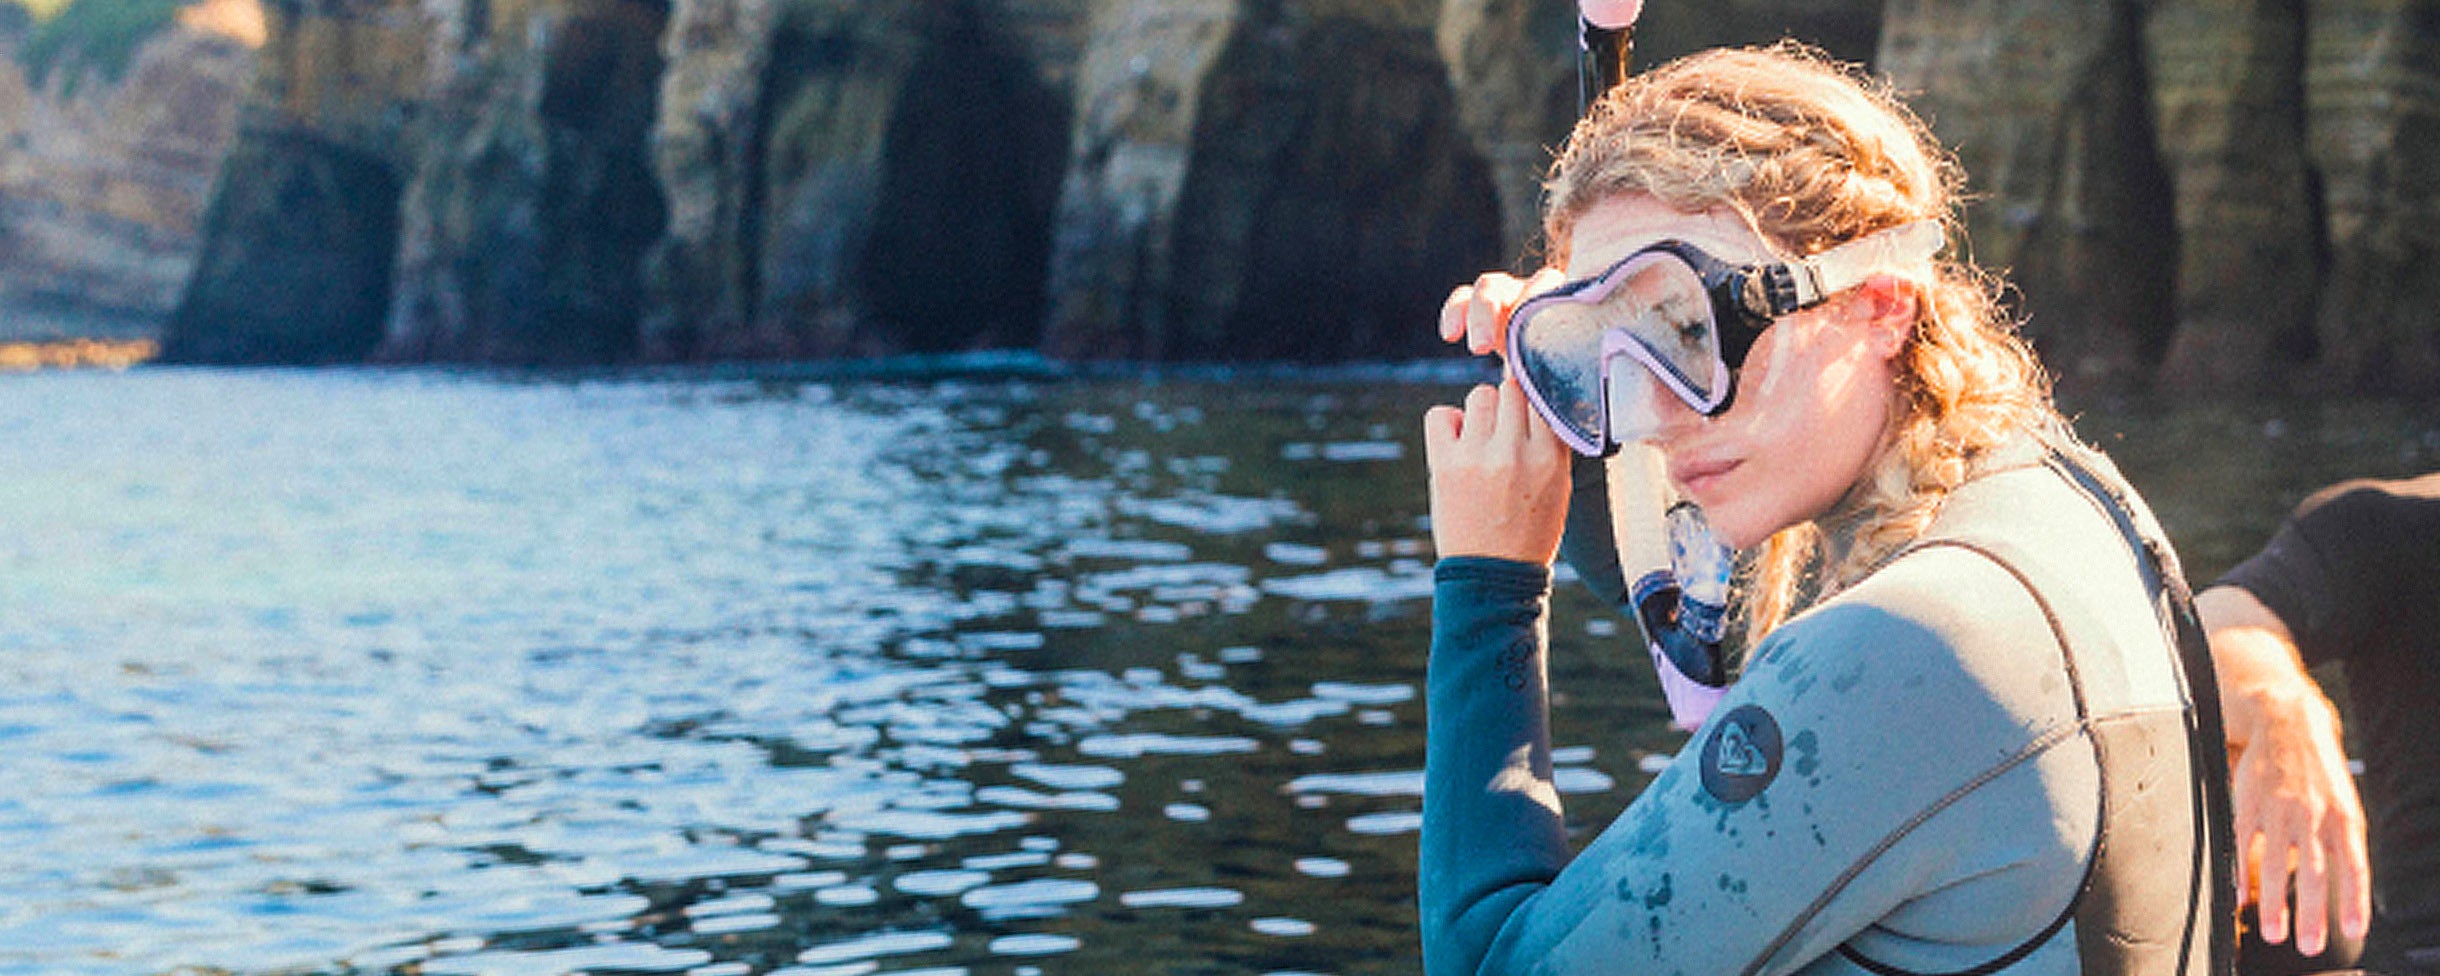 Tours - Snorkeling Tours available through Everyday California in La Jolla, California.